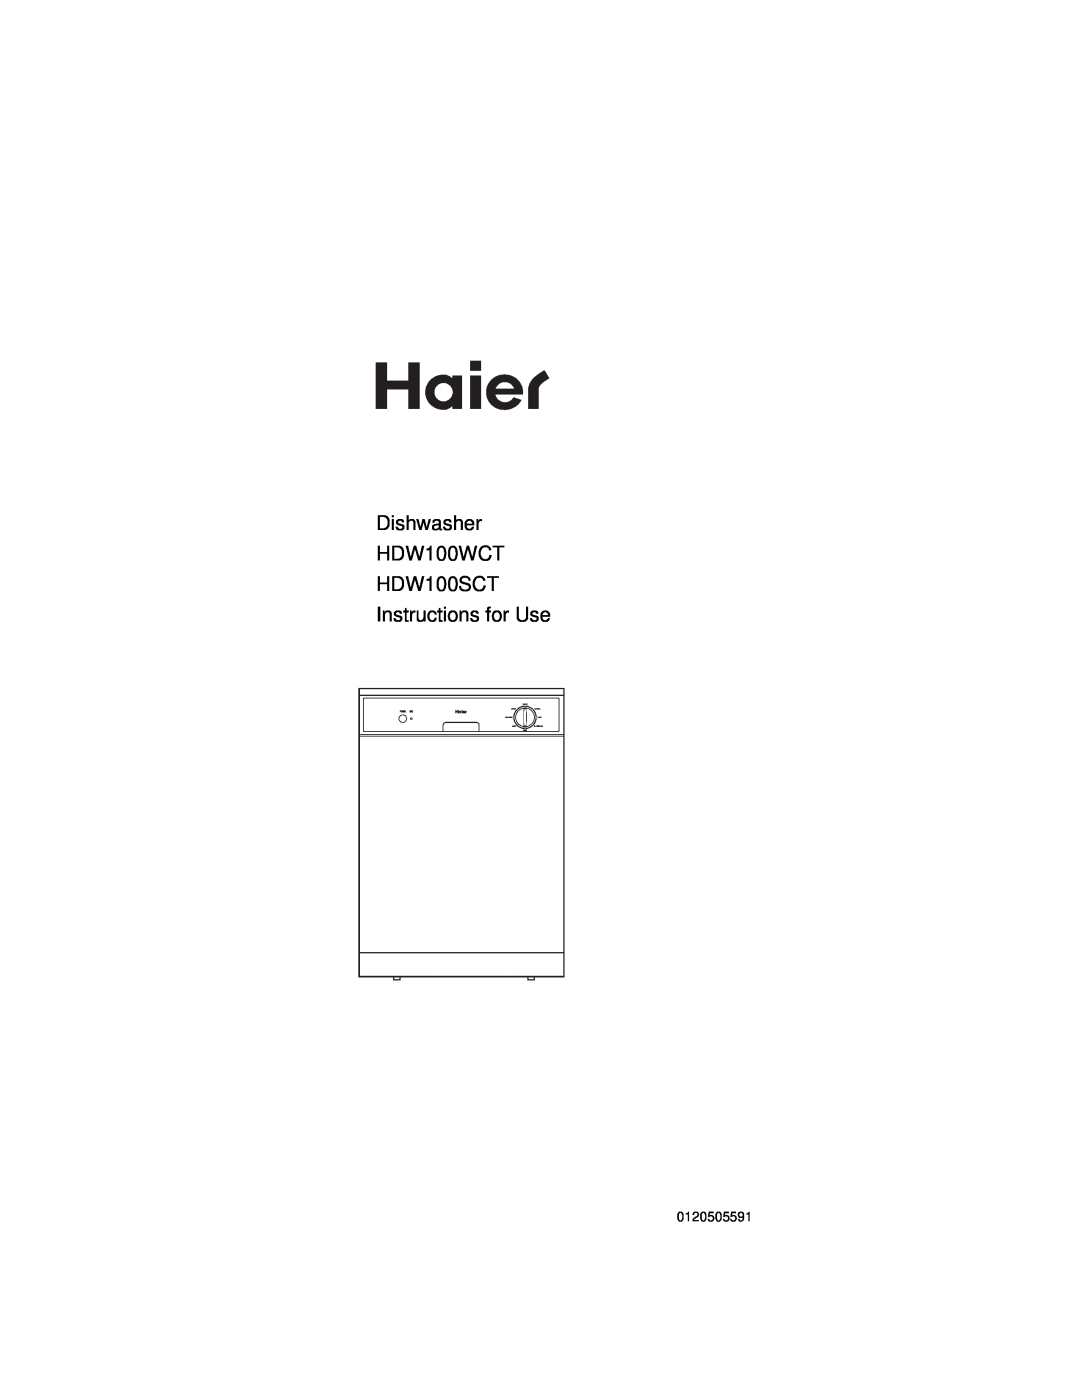 Haier manual Dishwasher HDW100WCT HDW100SCT, Instructions for Use, 0120505591 